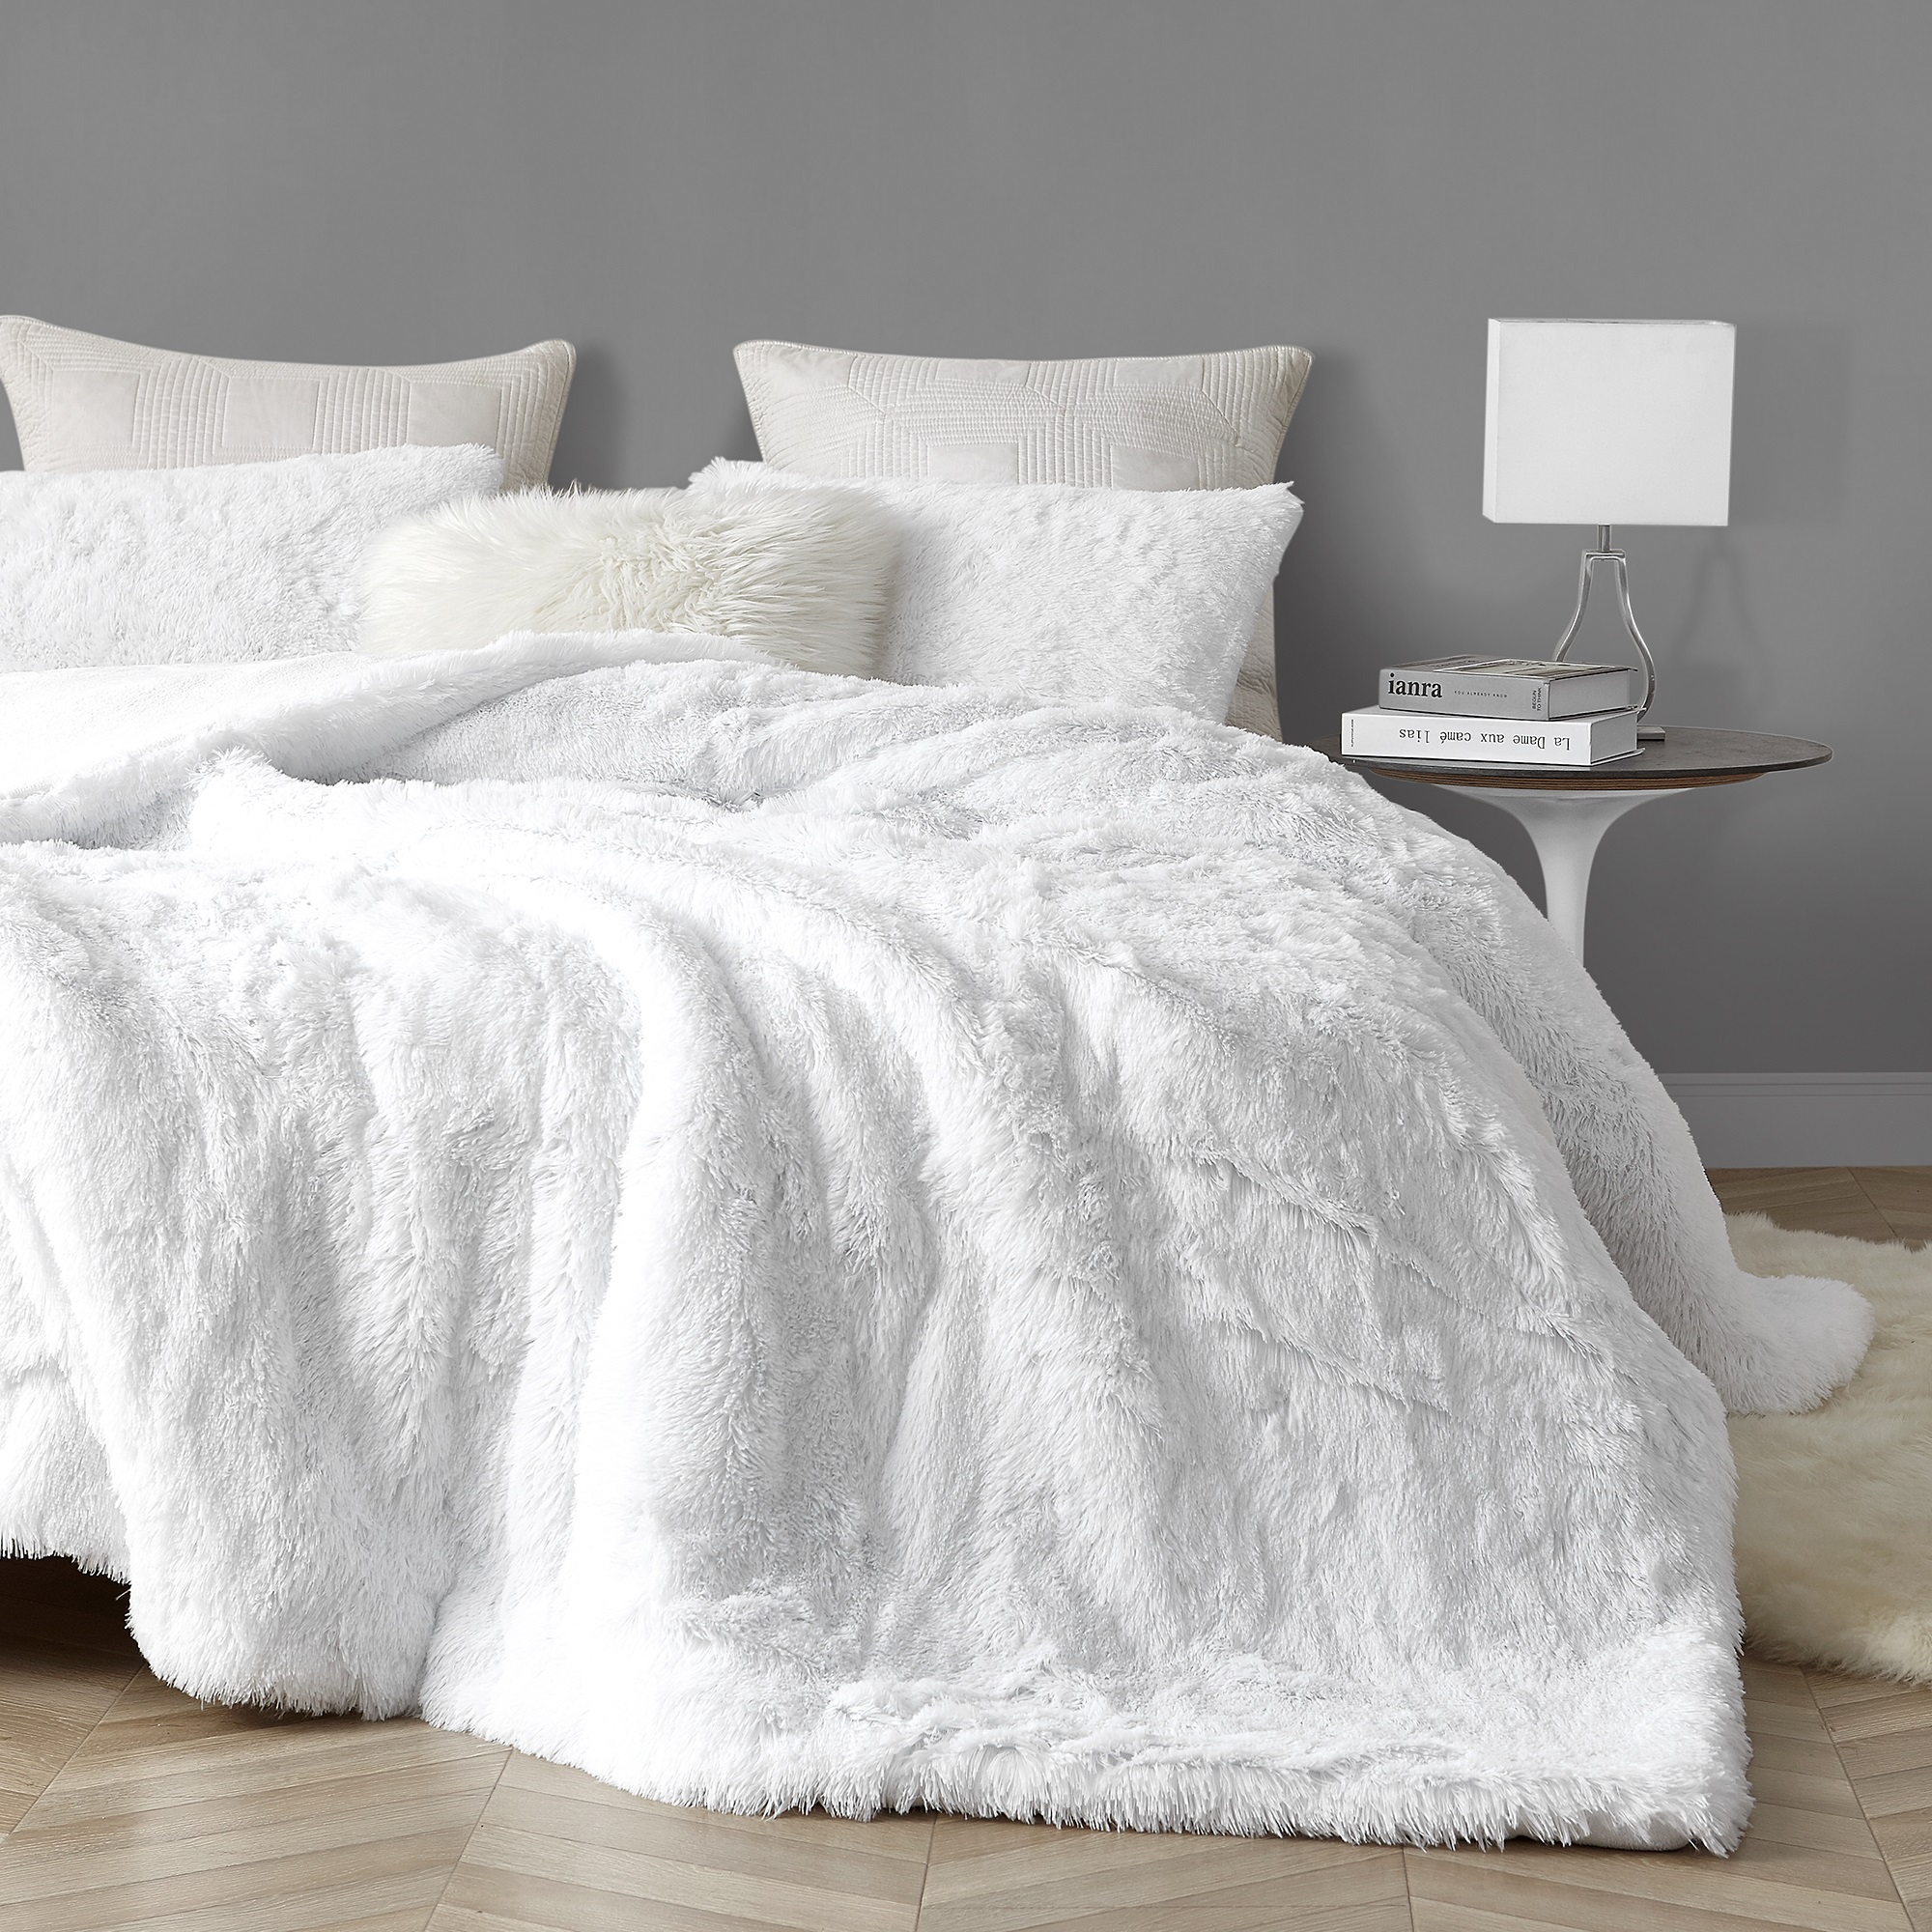 Coma Inducer?? Oversized Comforter - Are You Kidding? - White